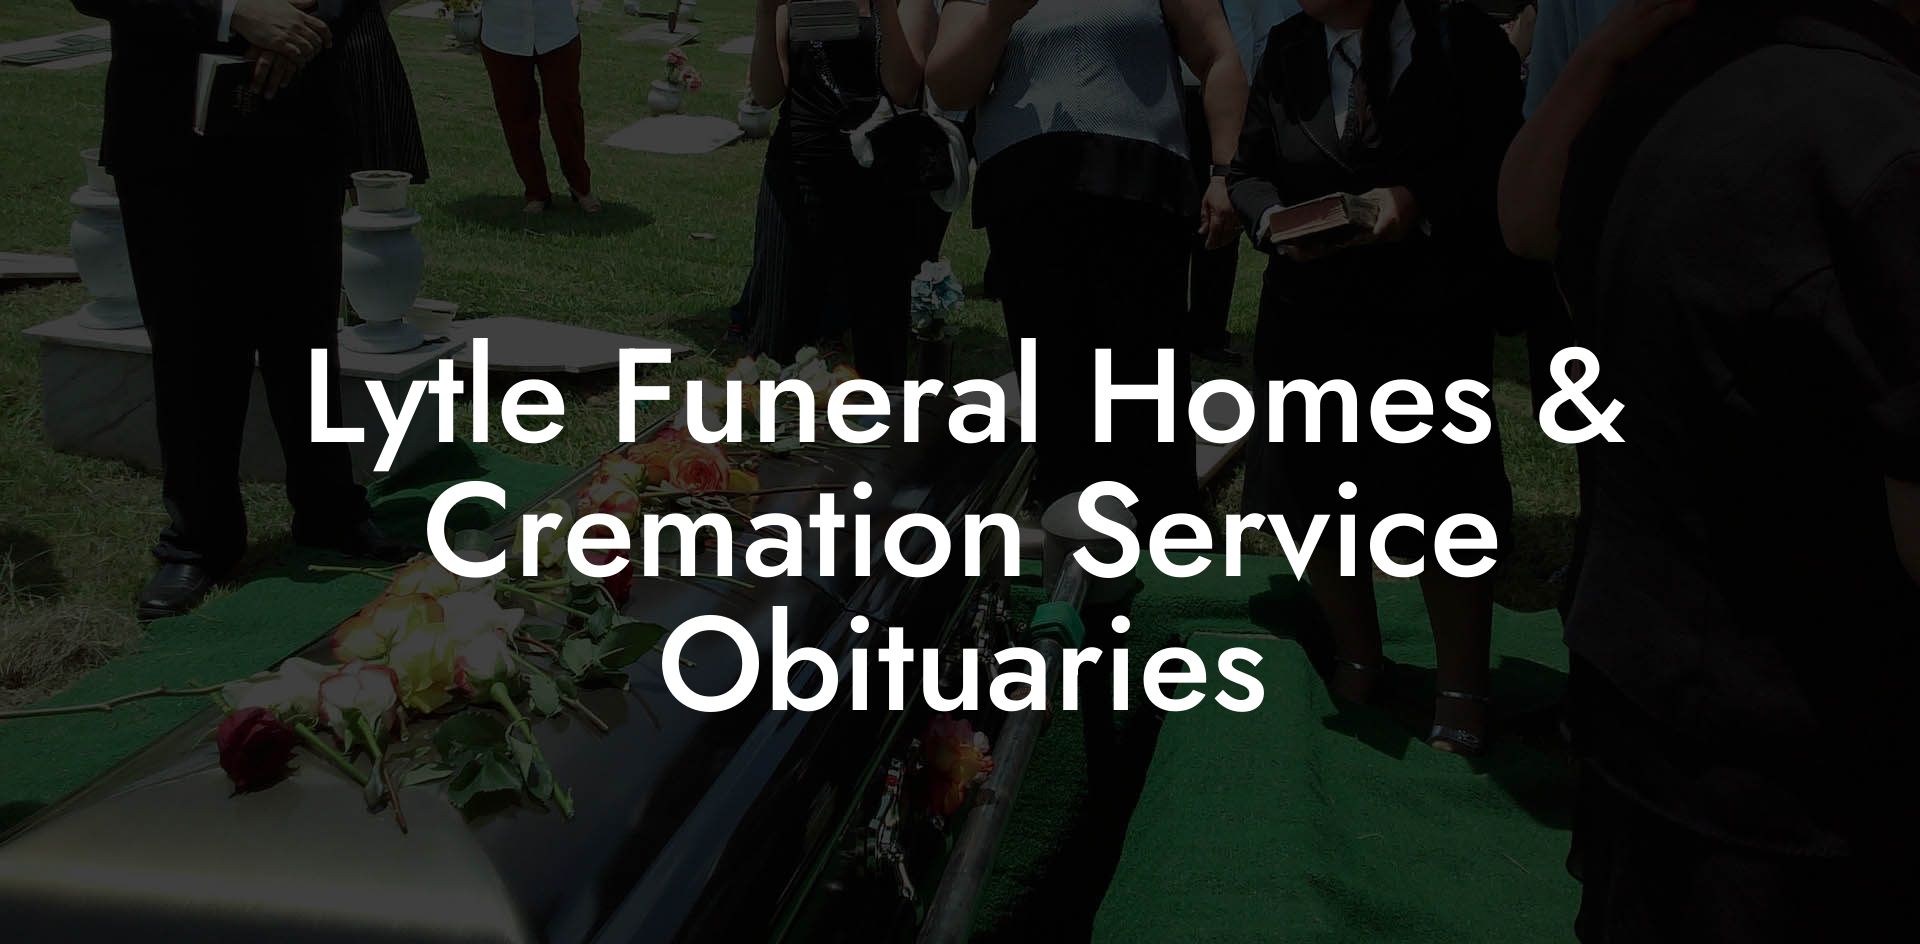 Lytle Funeral Homes & Cremation Service Obituaries